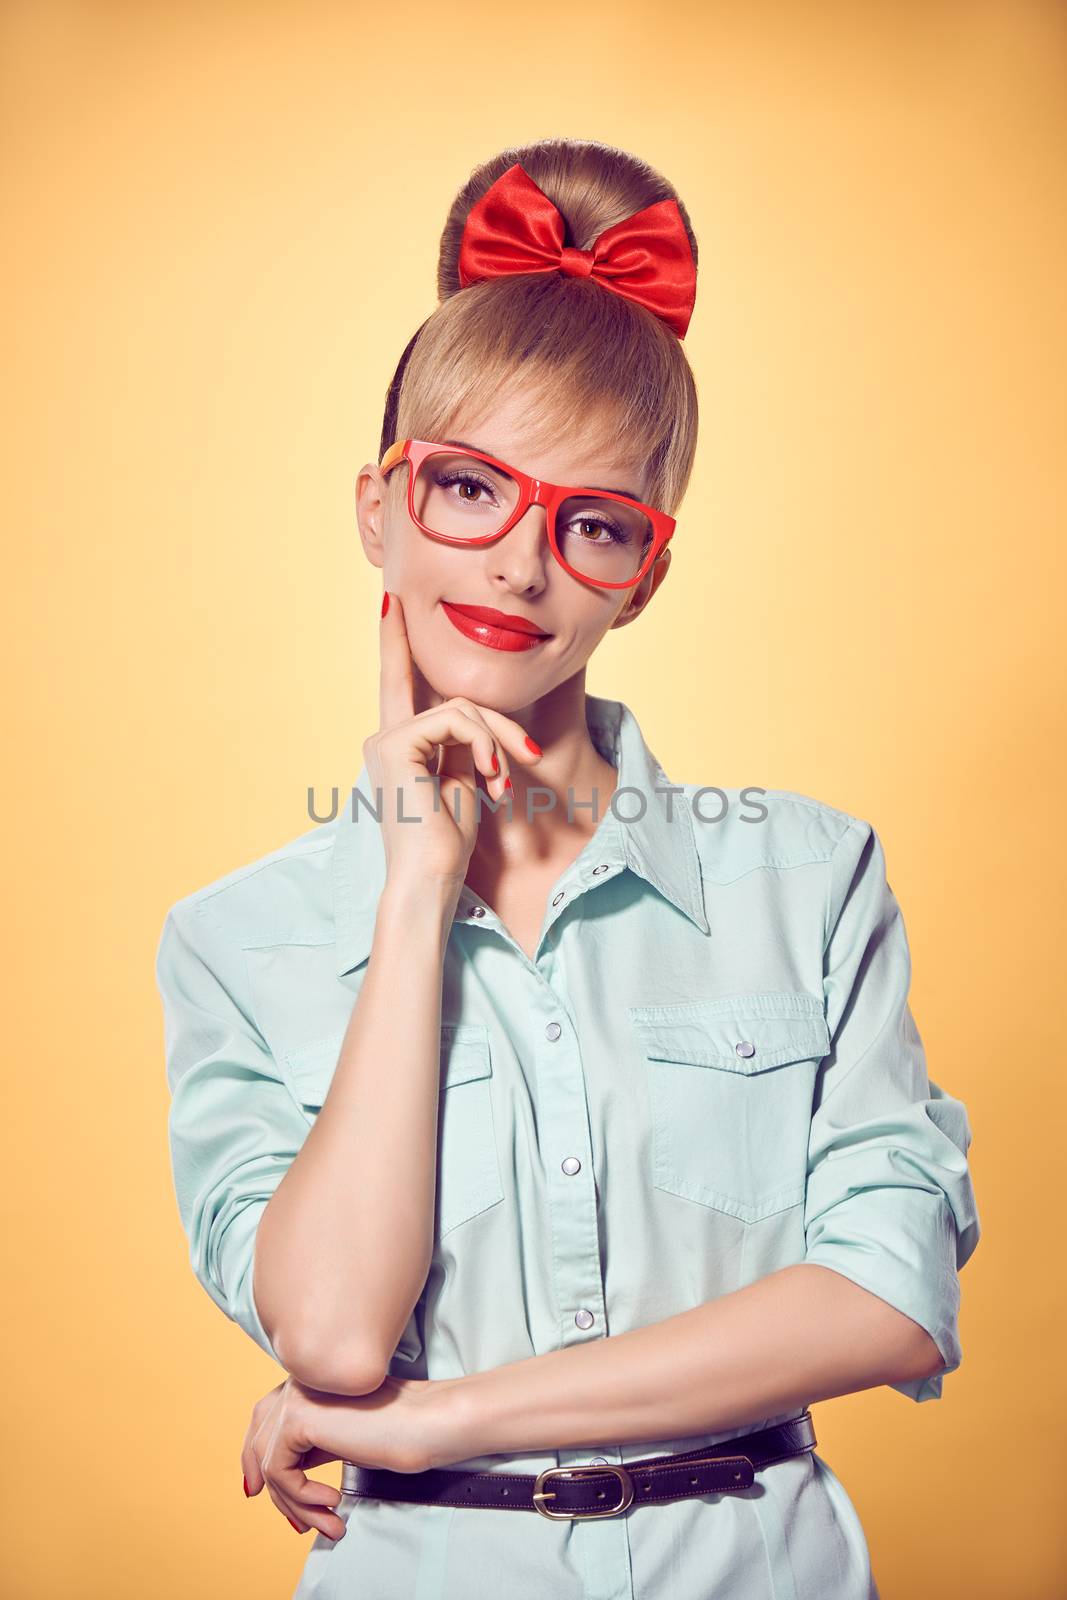 Beauty fashion portrait business woman in stylish red glasses thinking, idea. Attractive pretty blonde girl smiling. Confidence, Pinup hairstyle bow makeup.Unusual playful, emotions.Vintage, on yellow